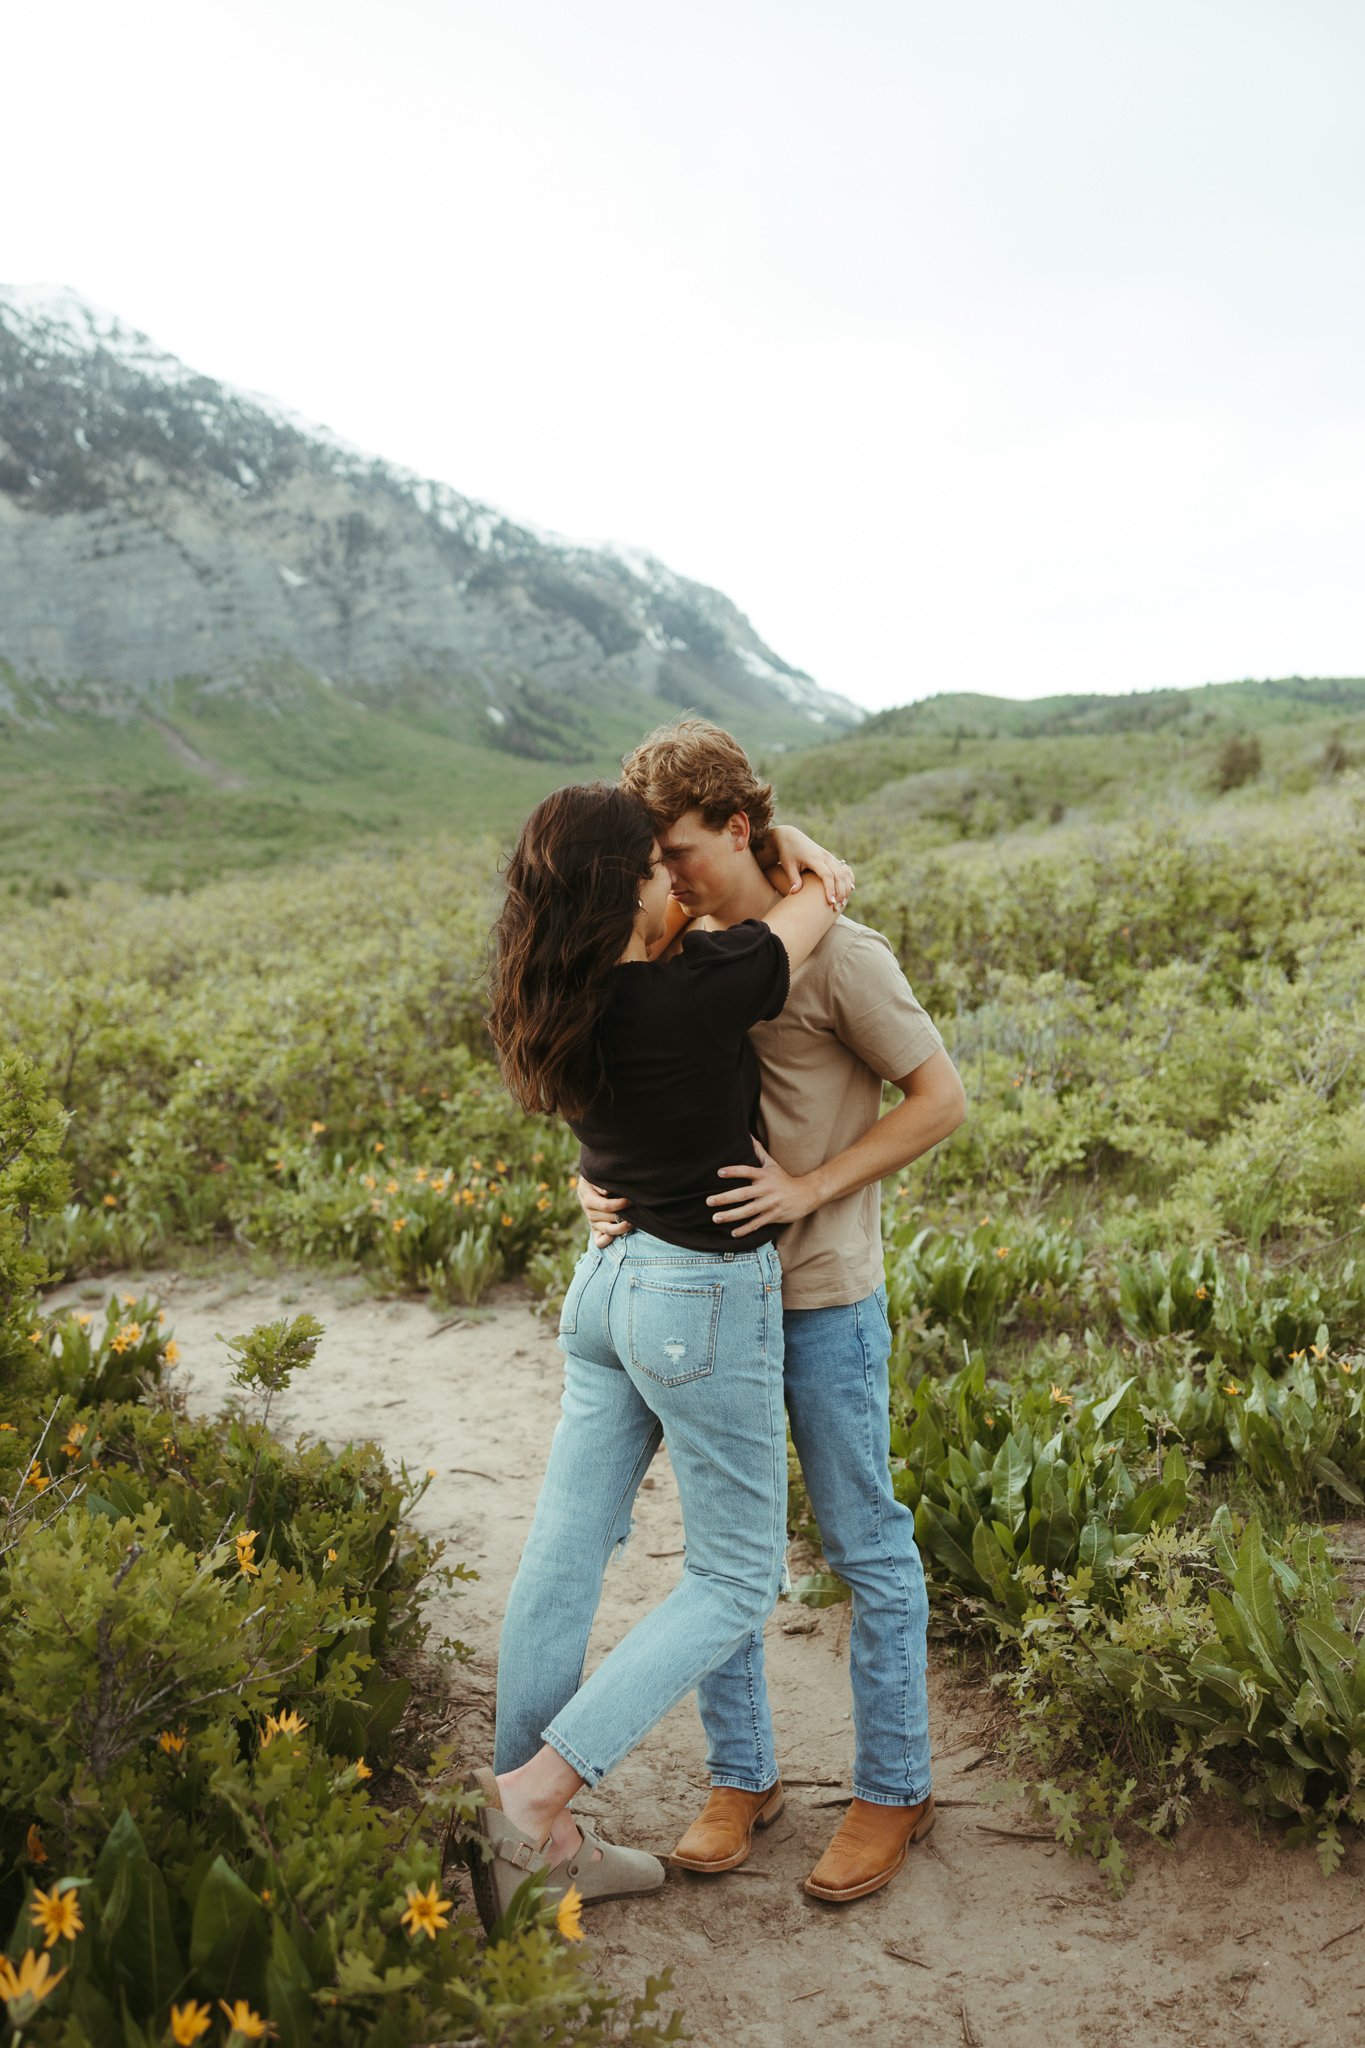 Spring-Provo-Canyon-Wildflowers-Engagement-Session-37